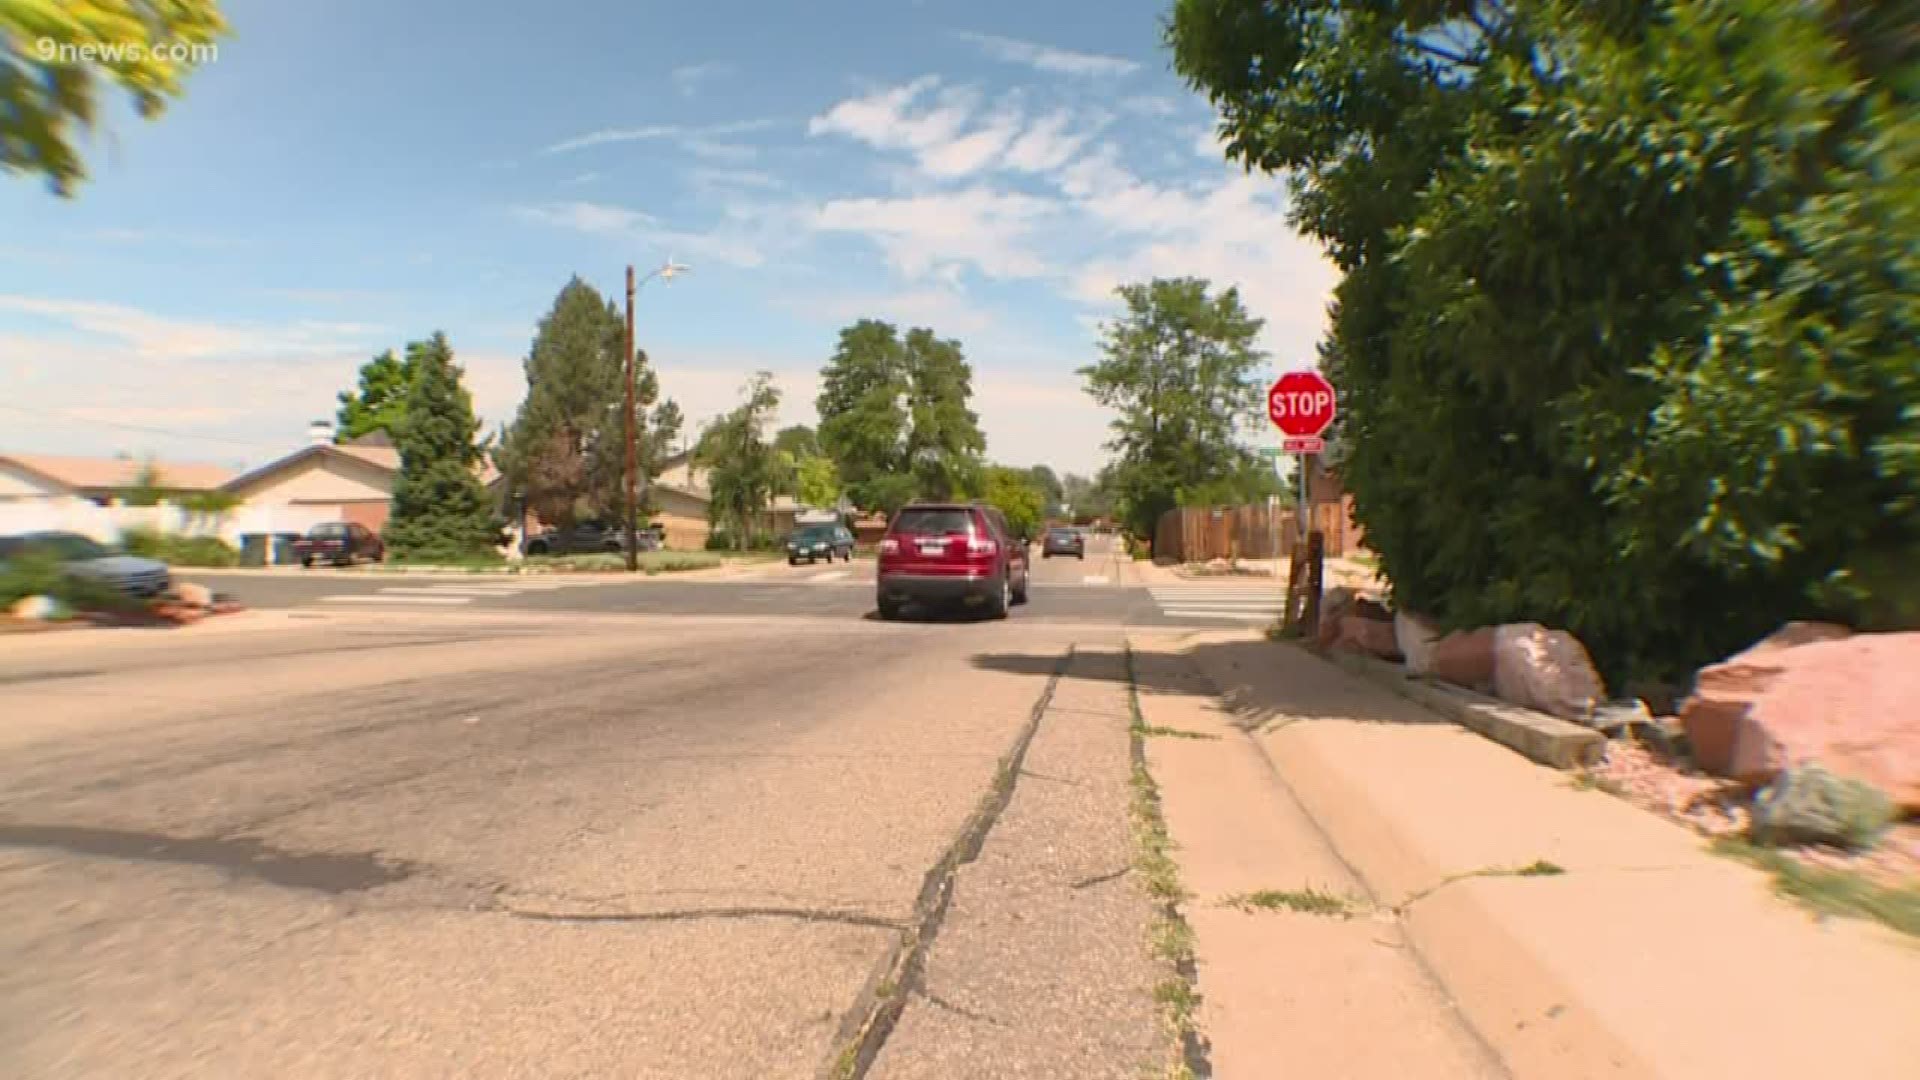 The couple was walking their dog in Northglenn when they were hit by a car on Aug. 10.